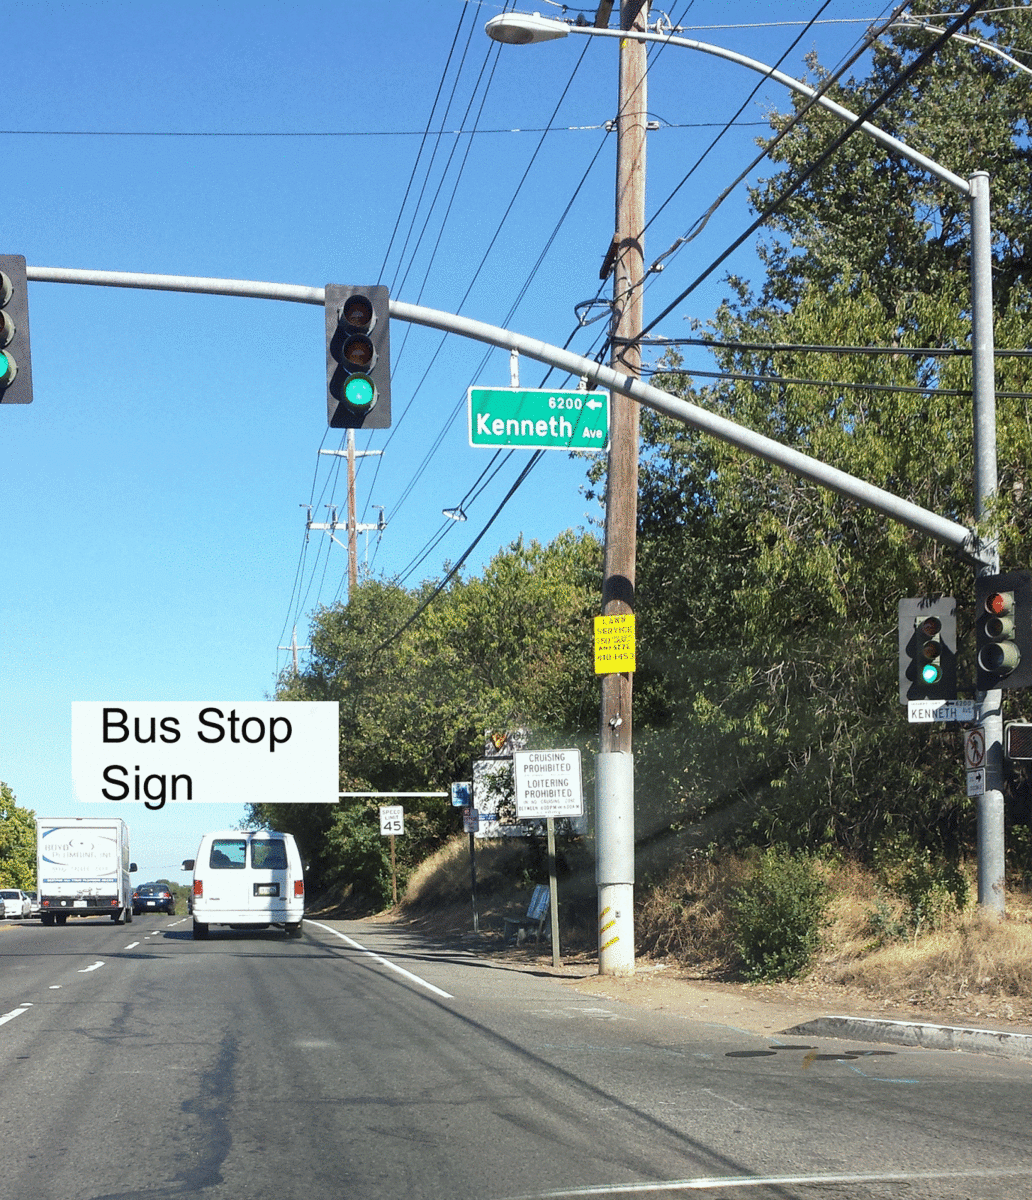 Note the lack of sidewalks connecting this "bus stop" to nearby residences.